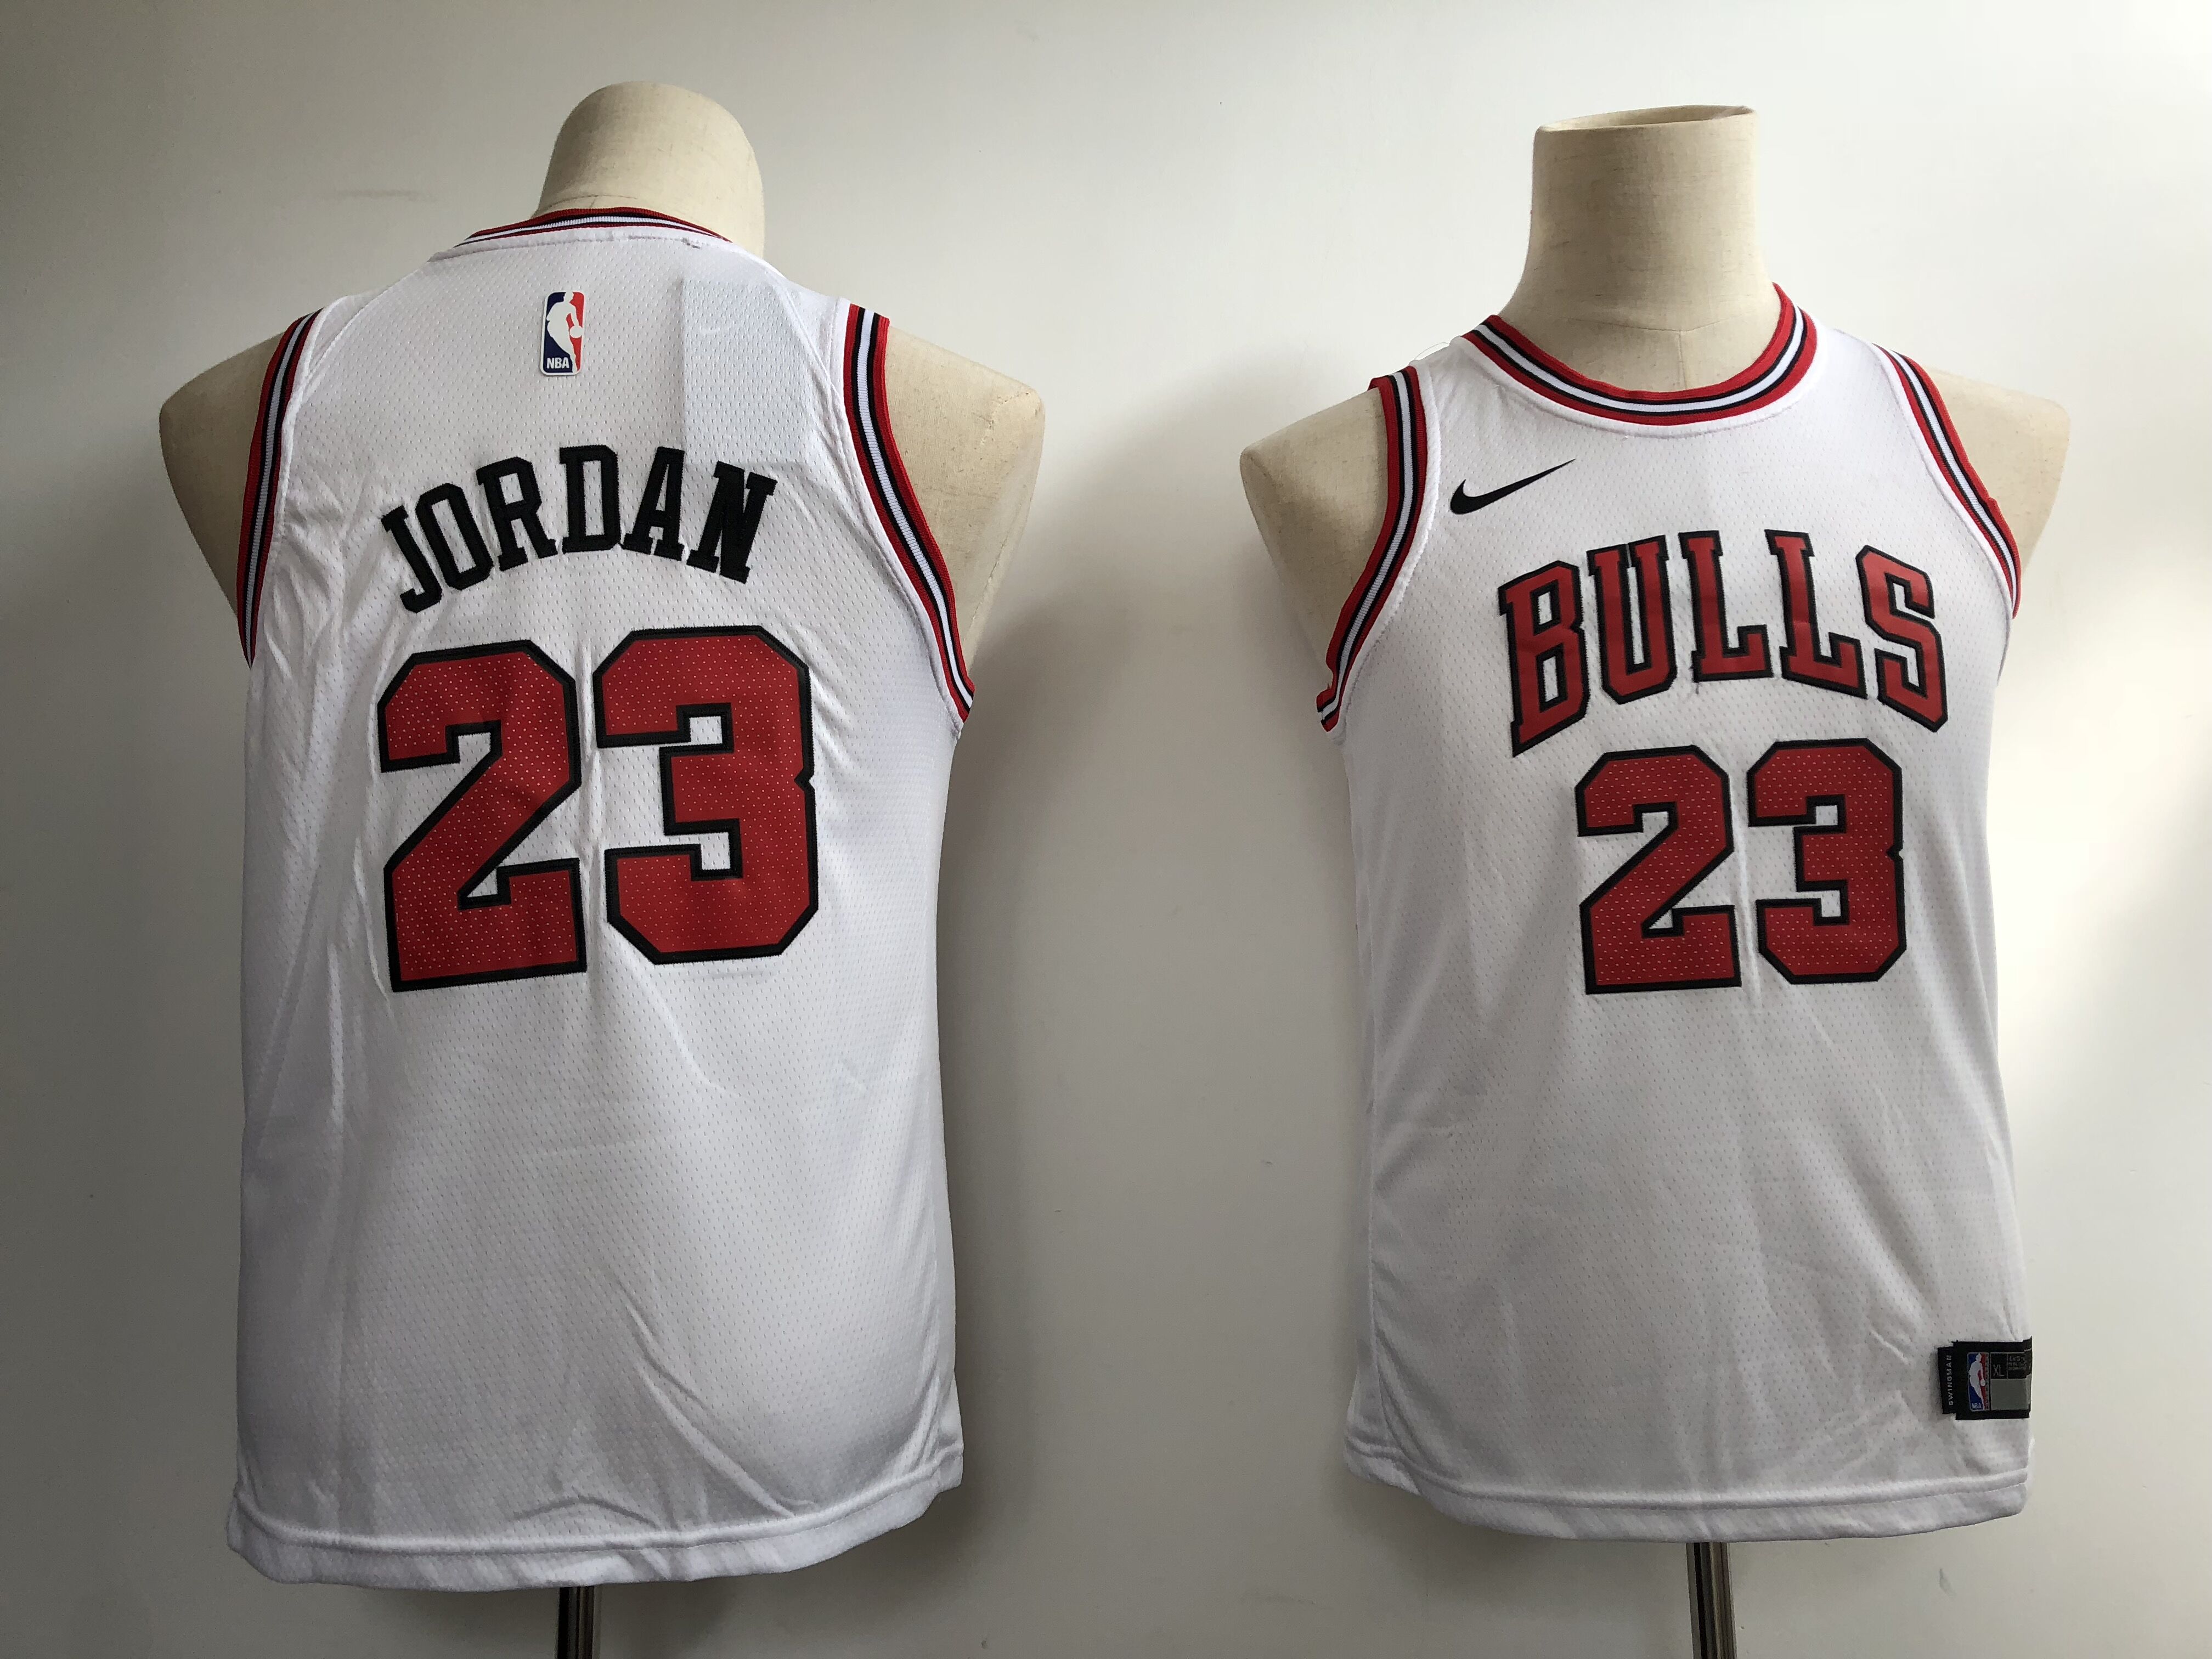 Youth Chicago Bulls #23 Jordan white NBA Jerseys->los angeles chargers->NFL Jersey